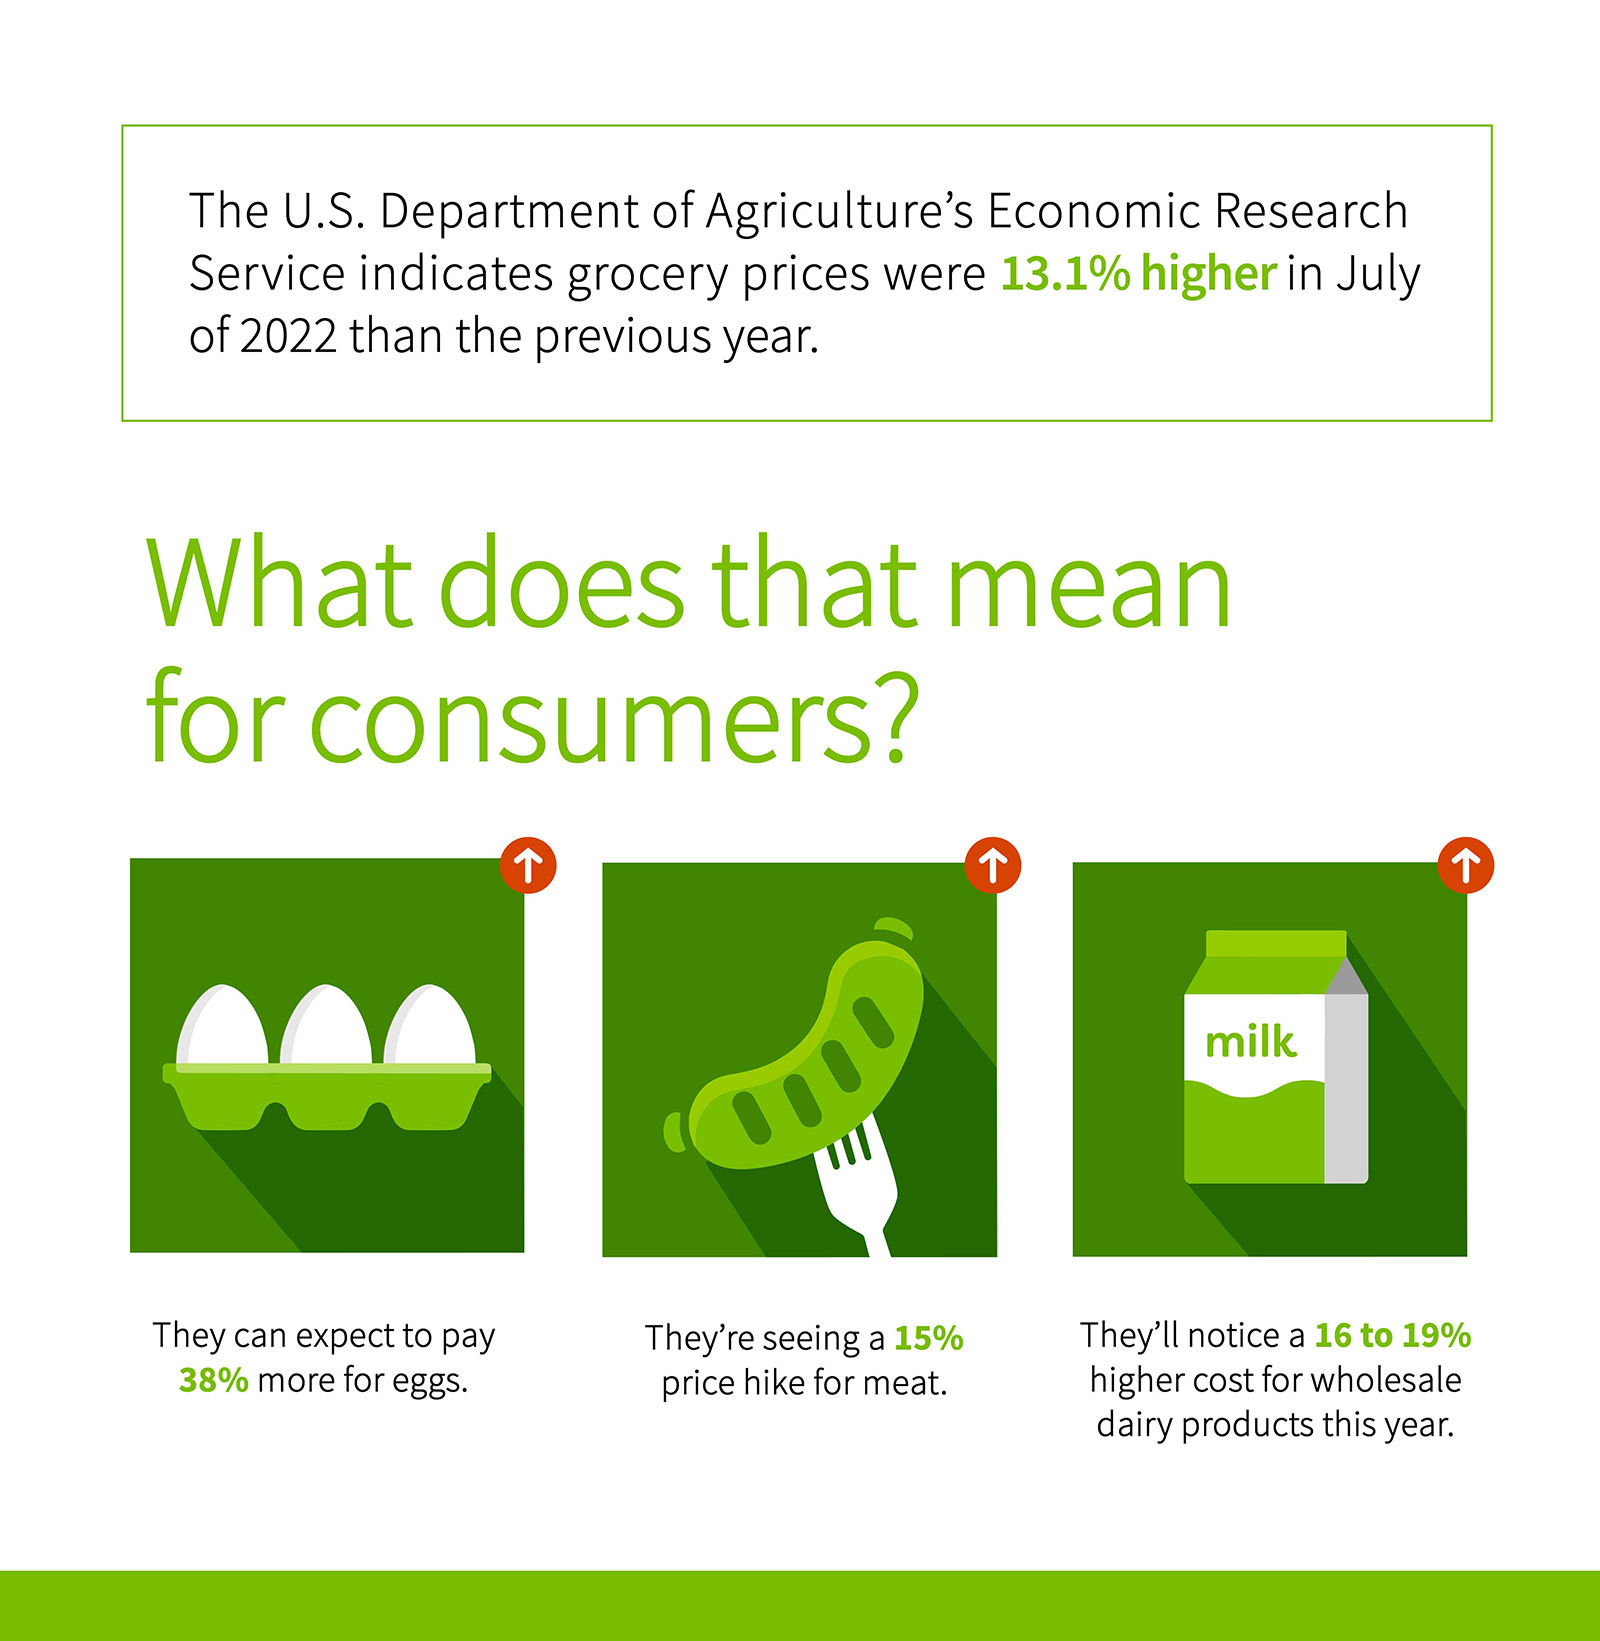 The U.S. Department of Agriculture’s Economic Research Service indicates grocery prices were 13.1% higher in July of 2022 than the previous year. What does that mean for consumers? They can expect to pay 38% more for eggs. They’re seeing a 15% price hike for meat. They’ll notice a 16 to 19% higher cost for wholesale dairy products this year.